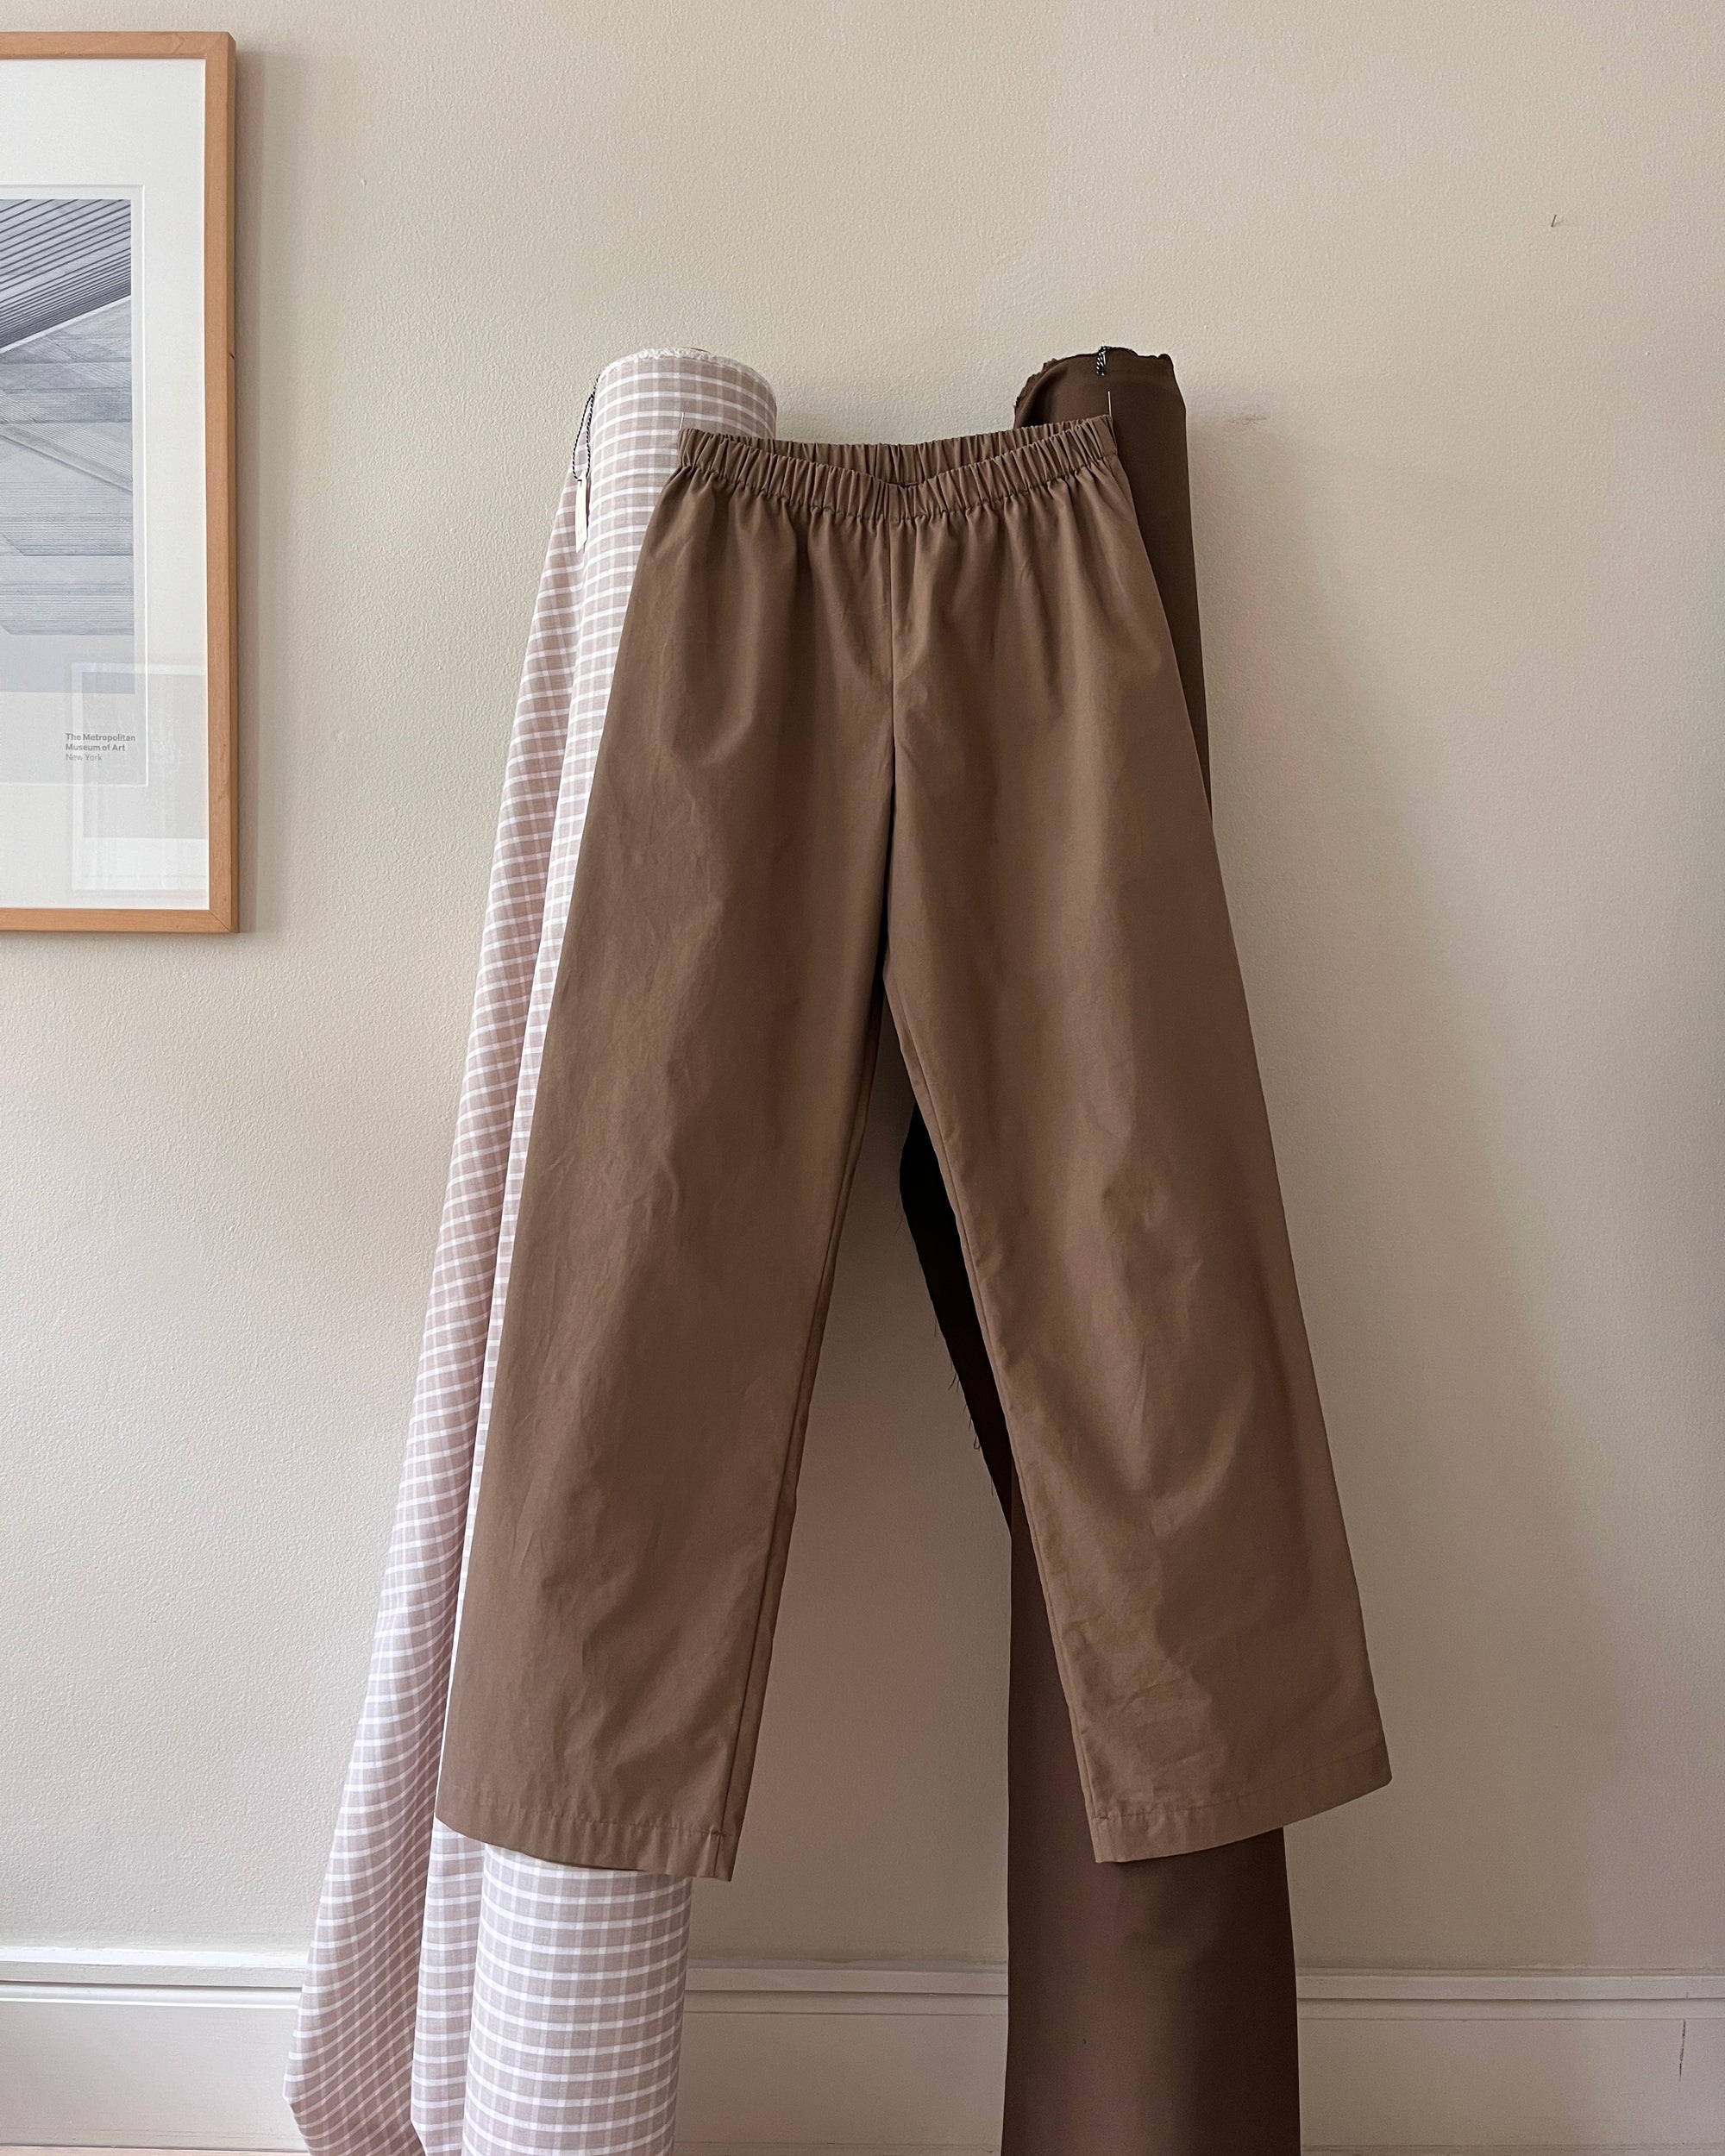 Sewing Project No. 01: Favorite Pants